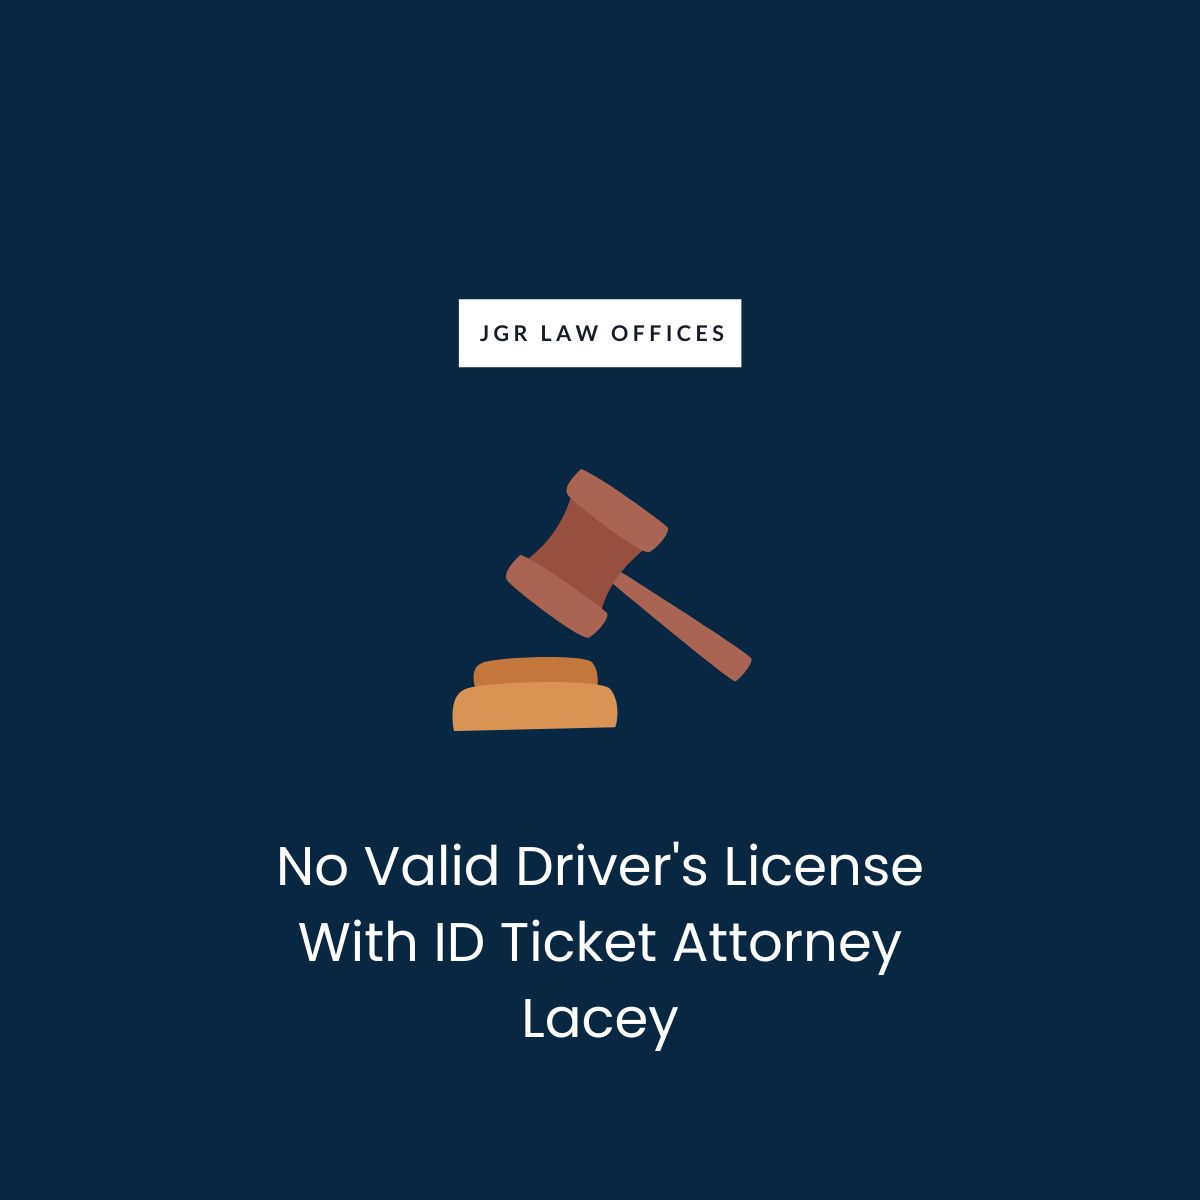 No Valid Driver's License With ID Ticket Attorney Lacey